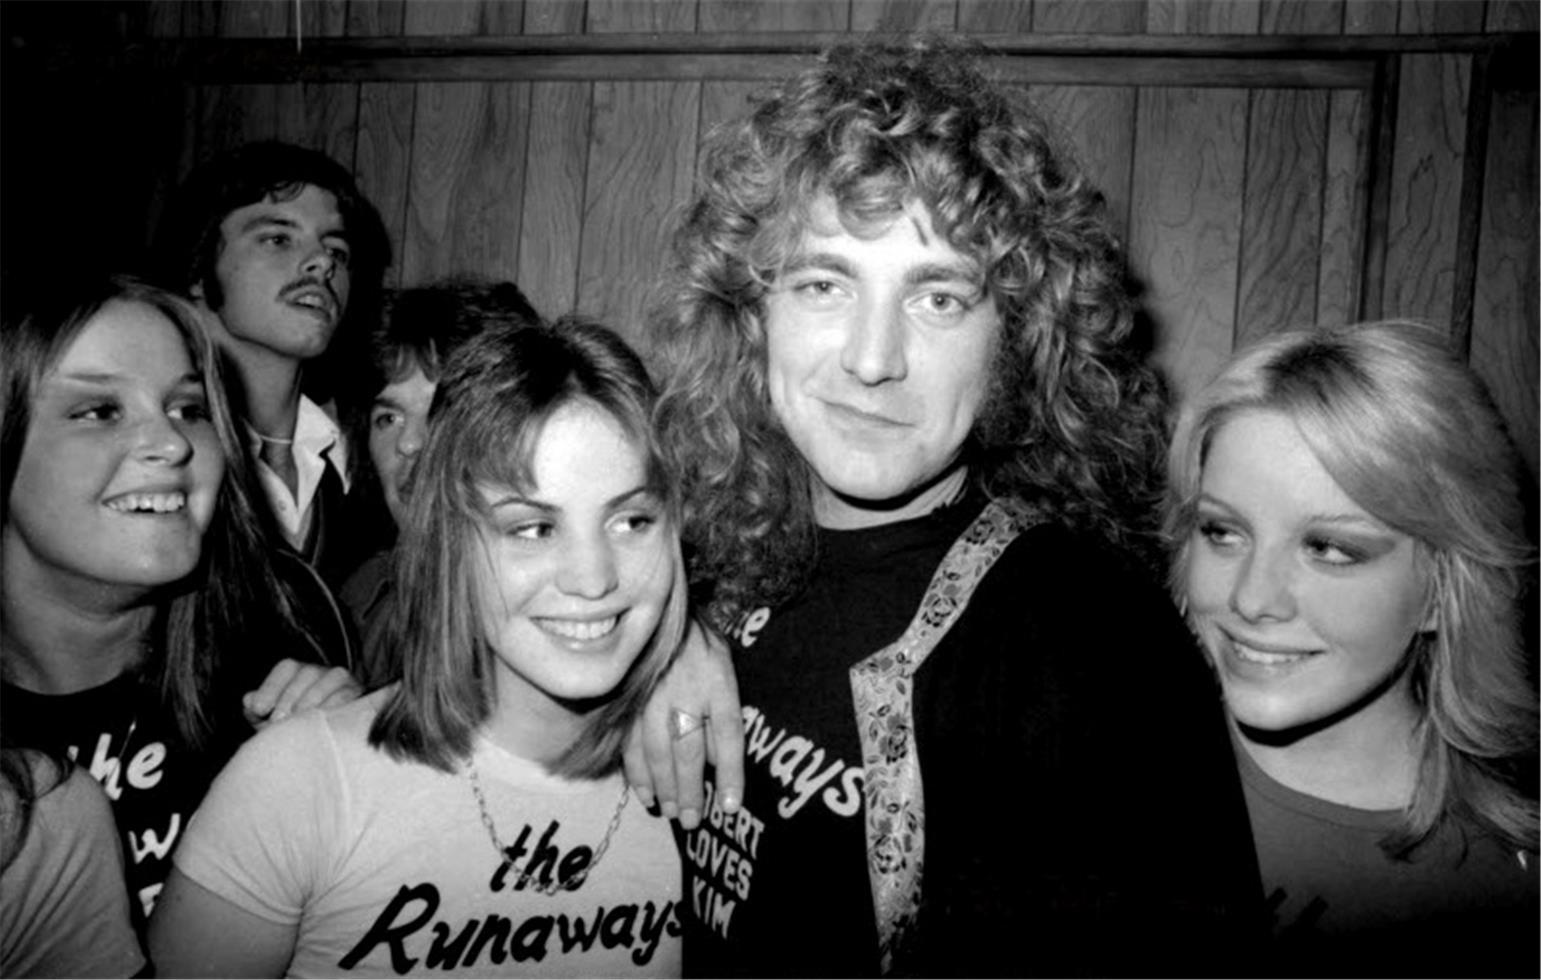 Barry Schultz Black and White Photograph - Robert Plant, Led Zeppelin, Los Angeles, CA, 1975